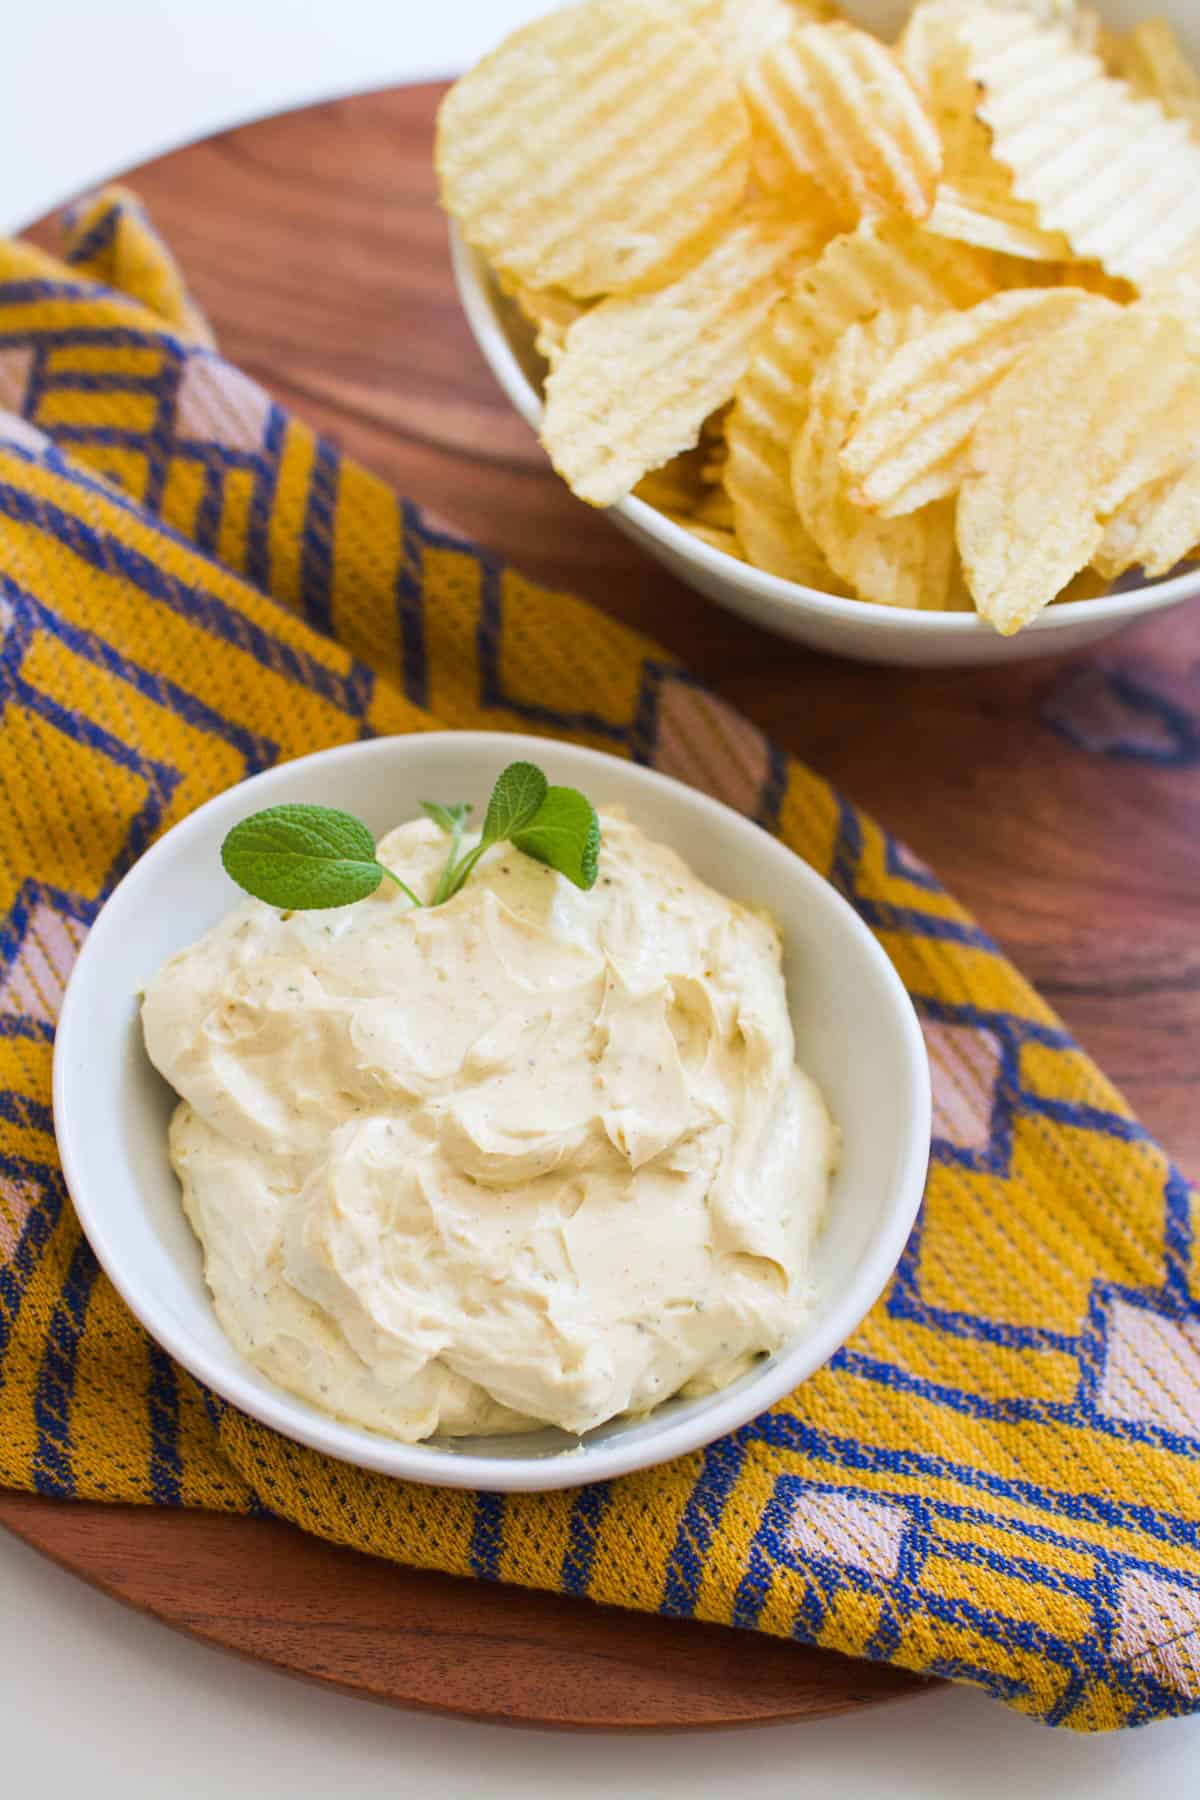 Fast and Easy Chip Dip Recipe